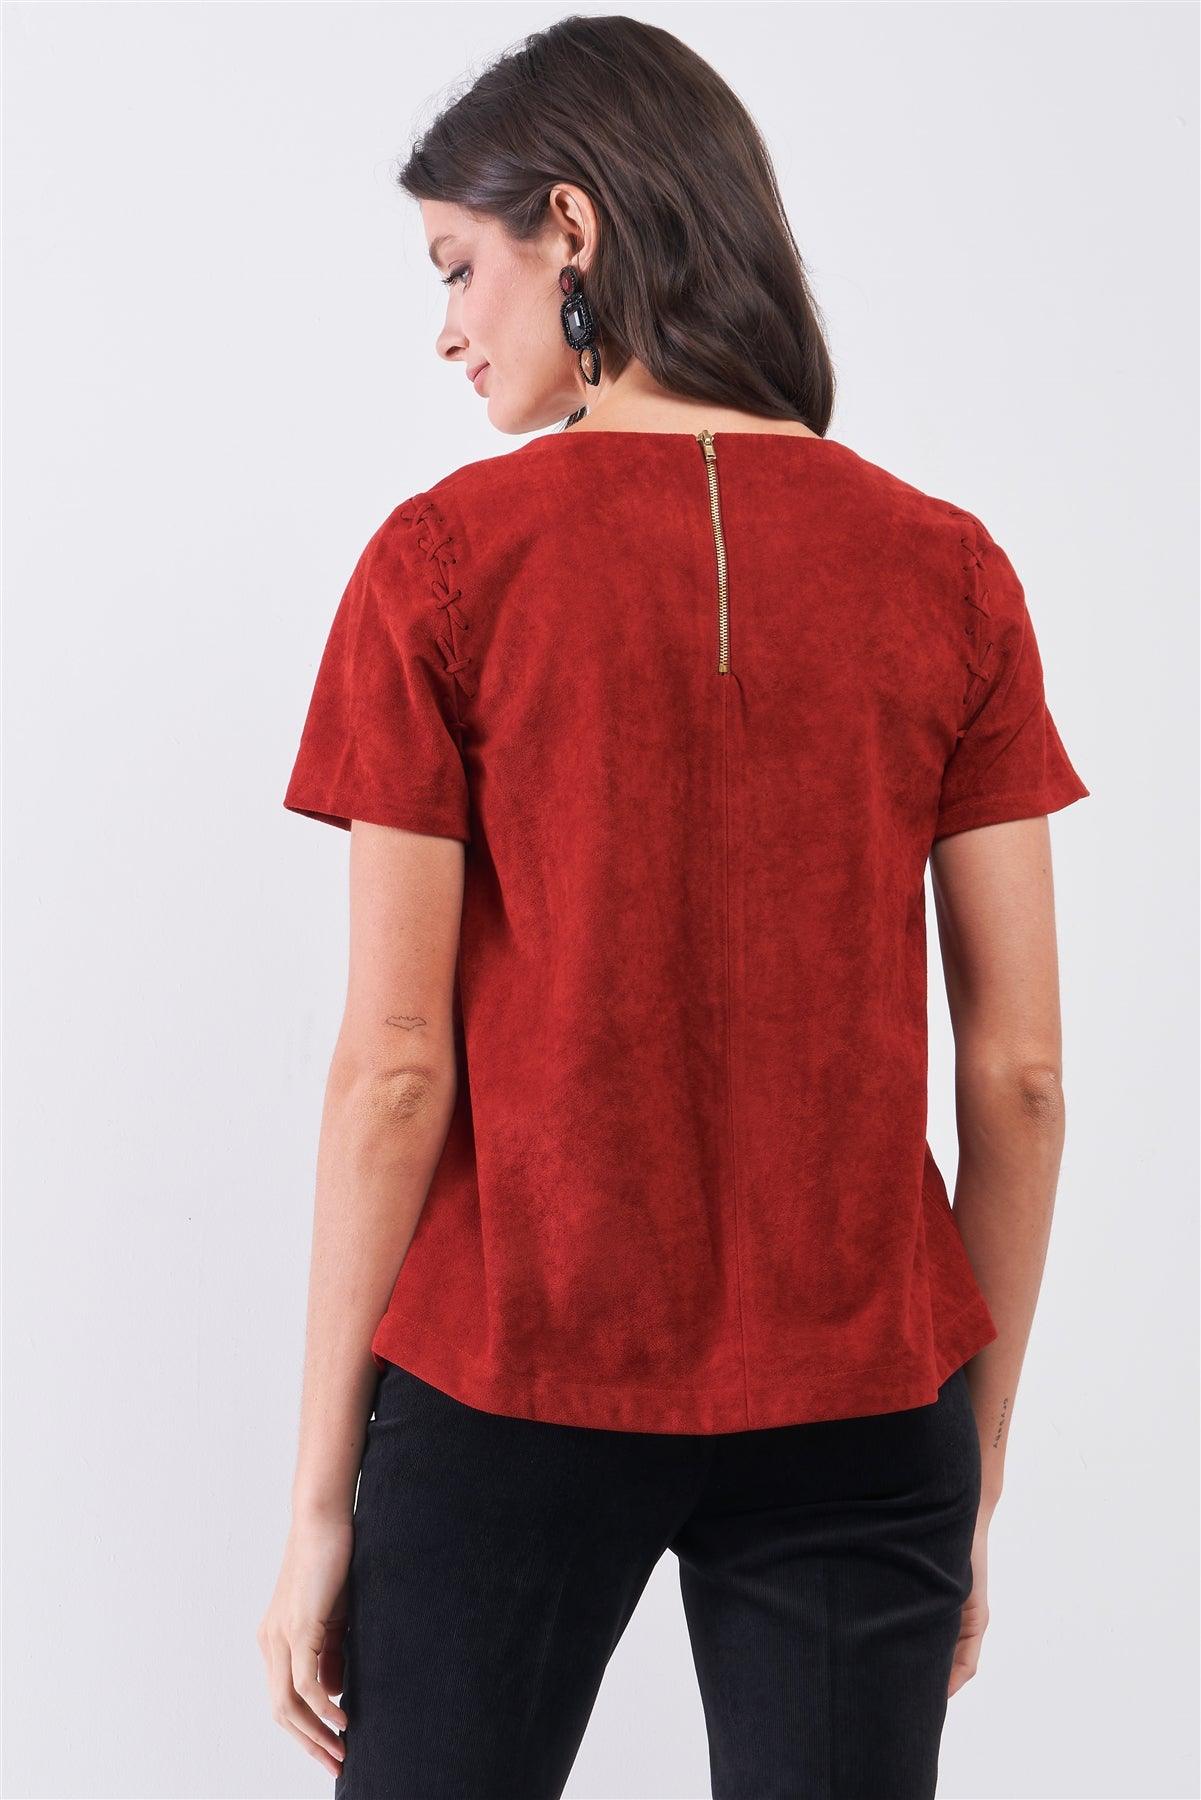 Rust Red Faux Suede Short Sleeve Round Neck Cross Stitching Detail Relaxed Top